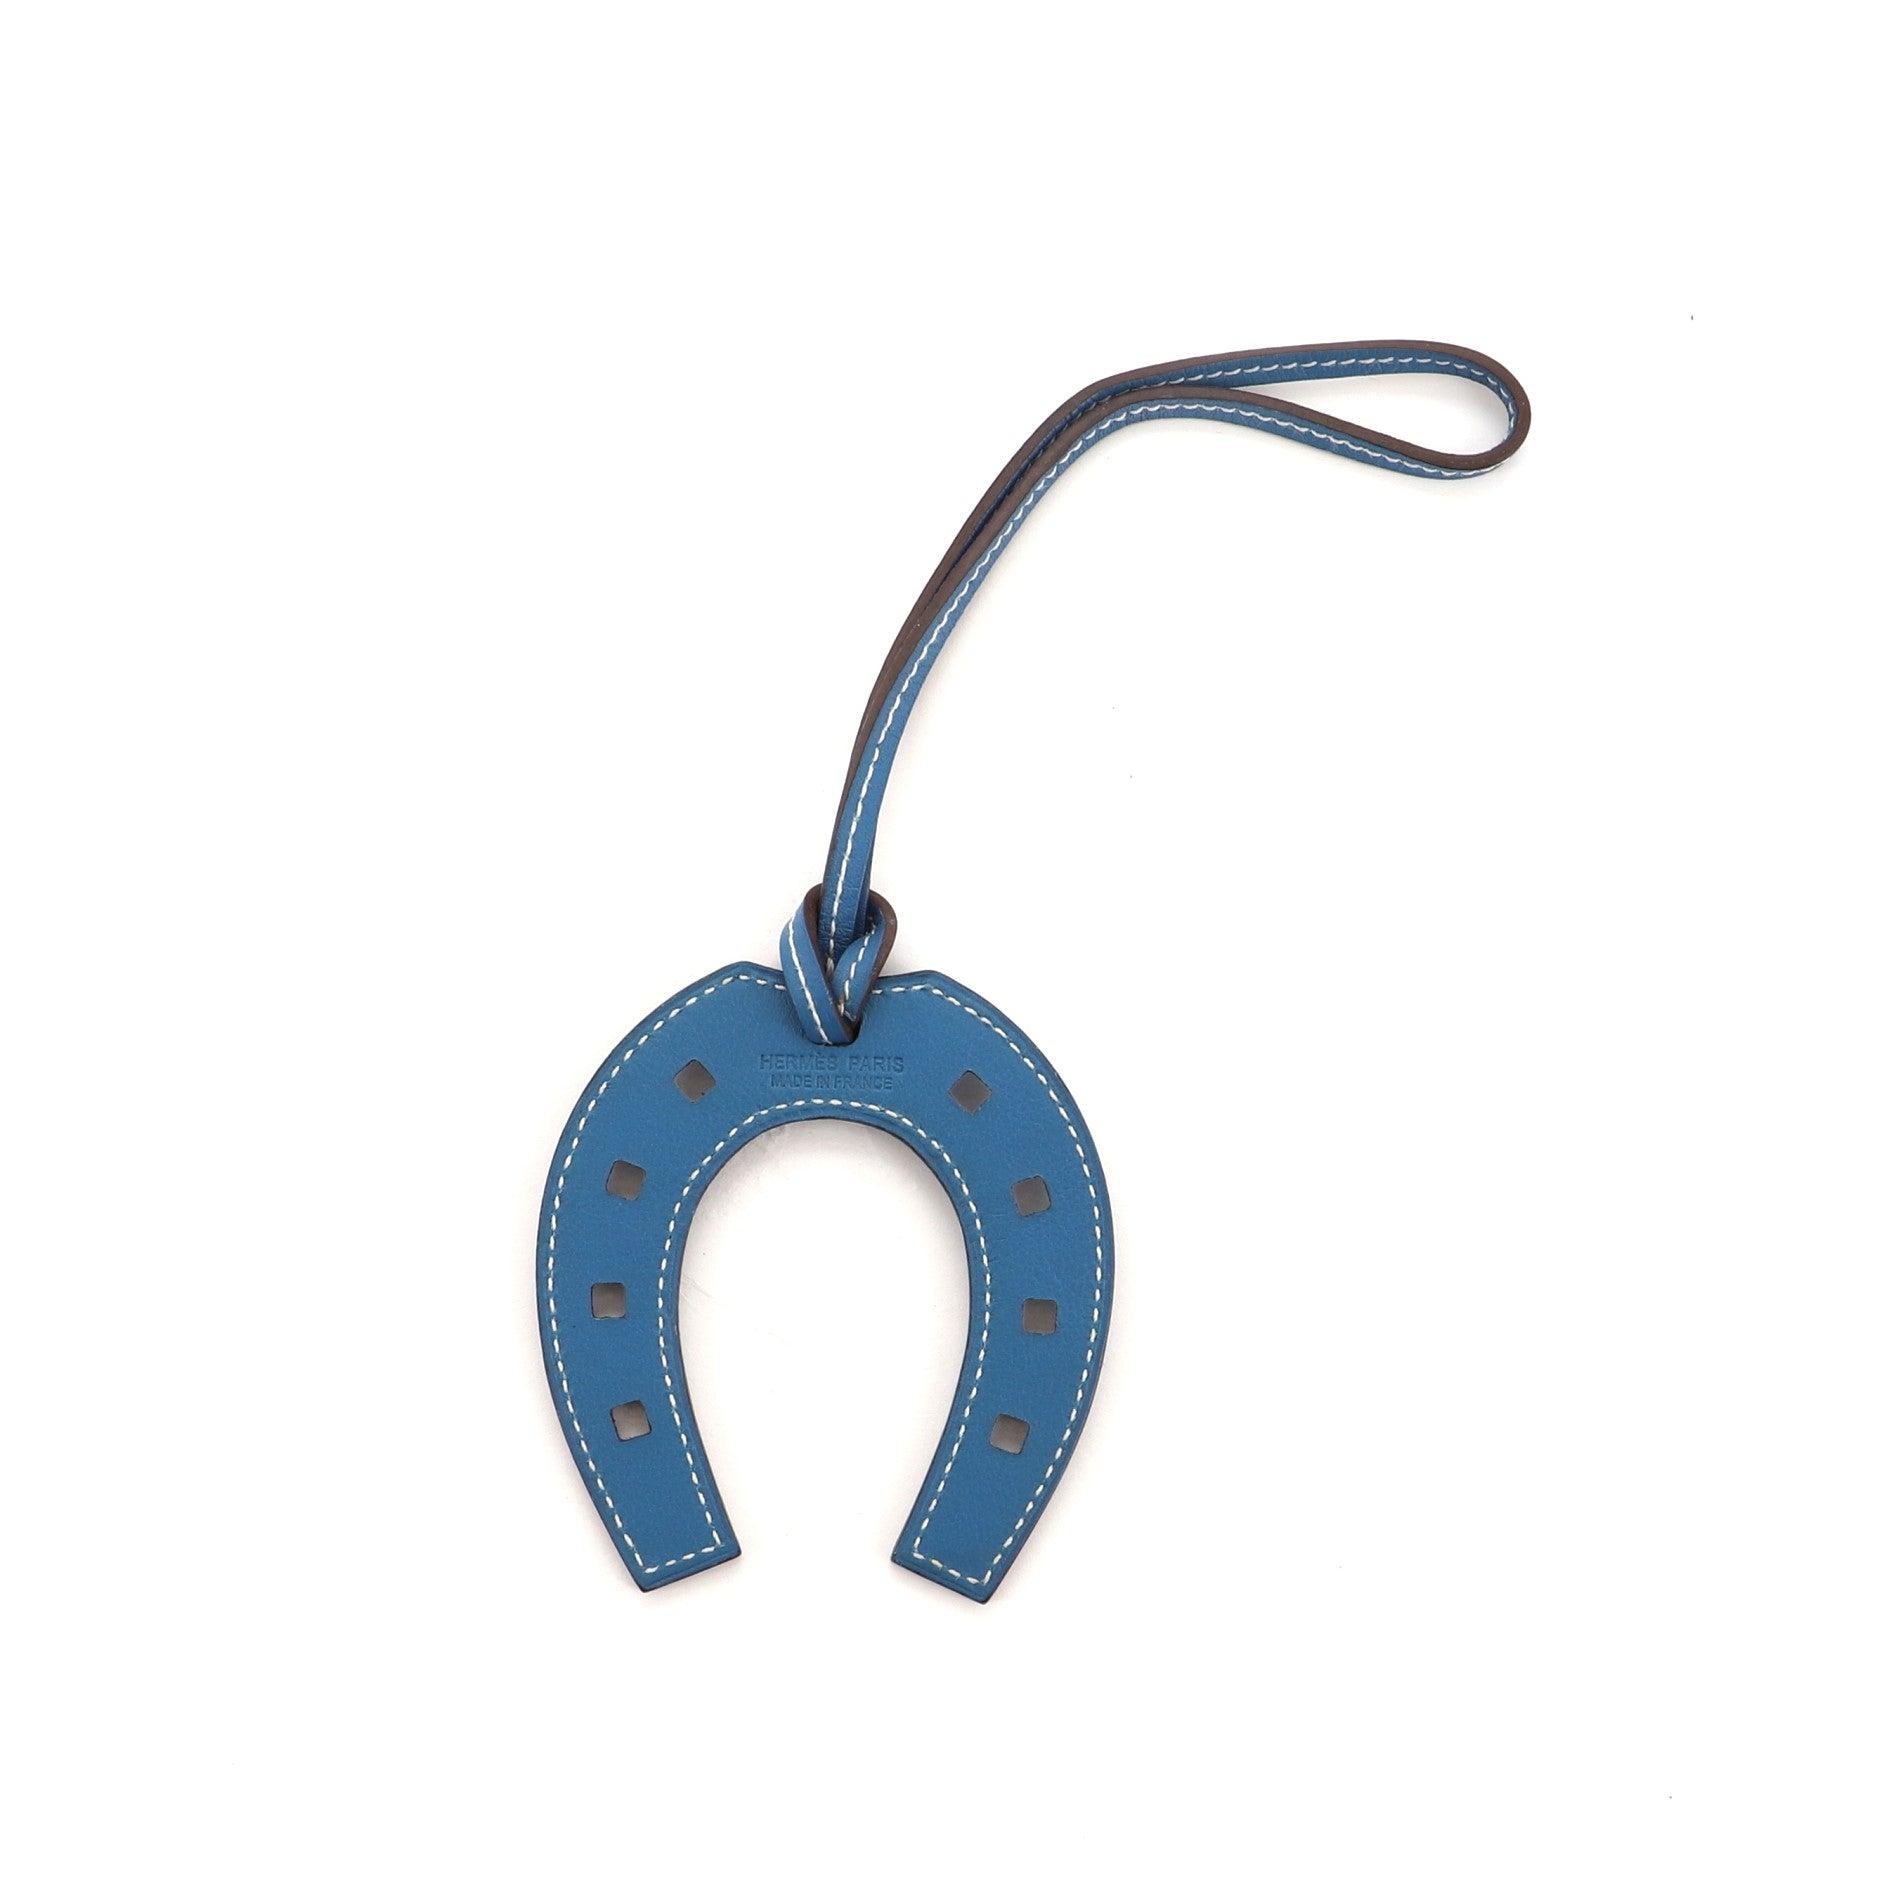 Hermes Paddock Horseshoe Bag Charm Leather
Blue Leather

Condition Details: Small glue stain on strap.

50565MSC

Height 3